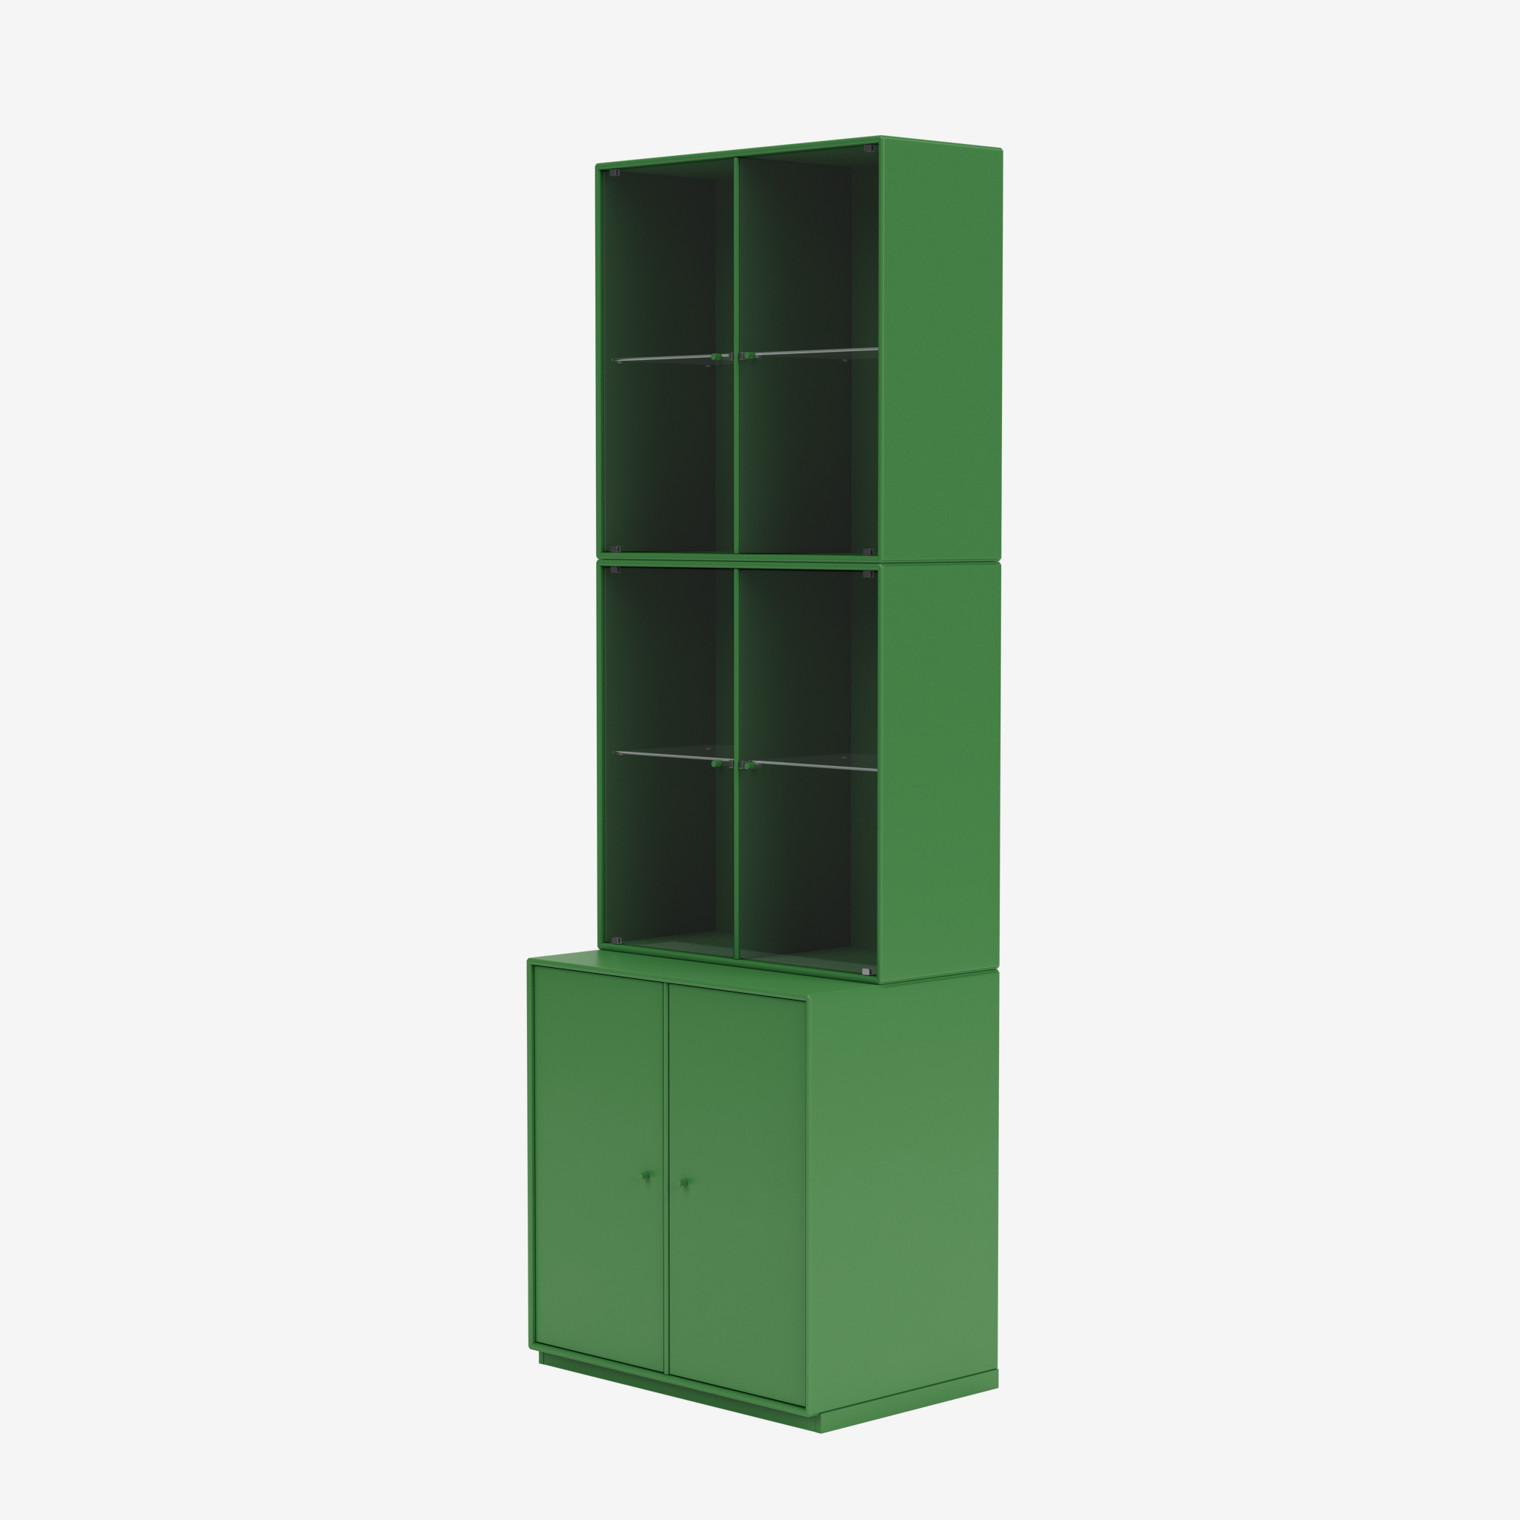 RISE display cabinet